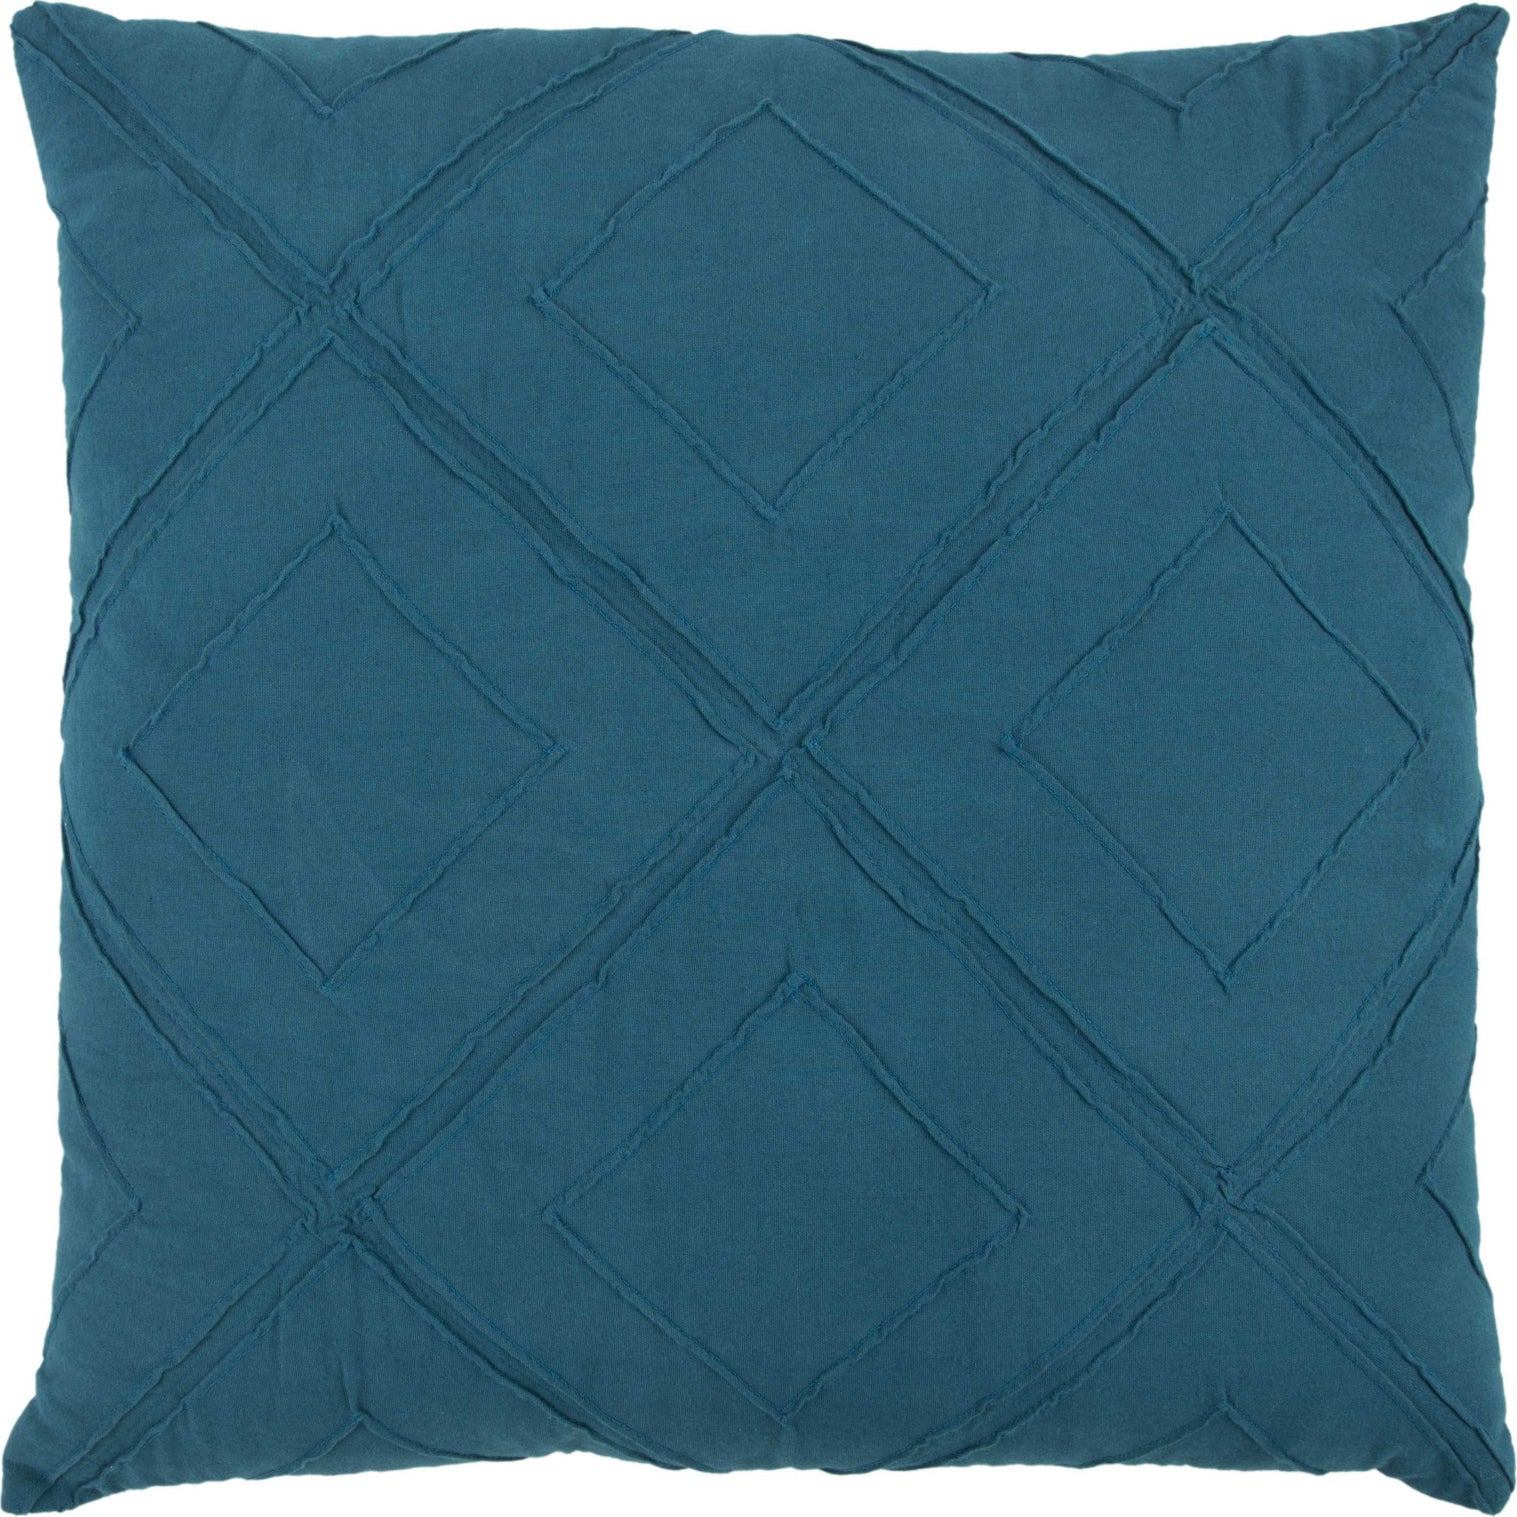 Rizzy Pillows T13270 Peacock Blue